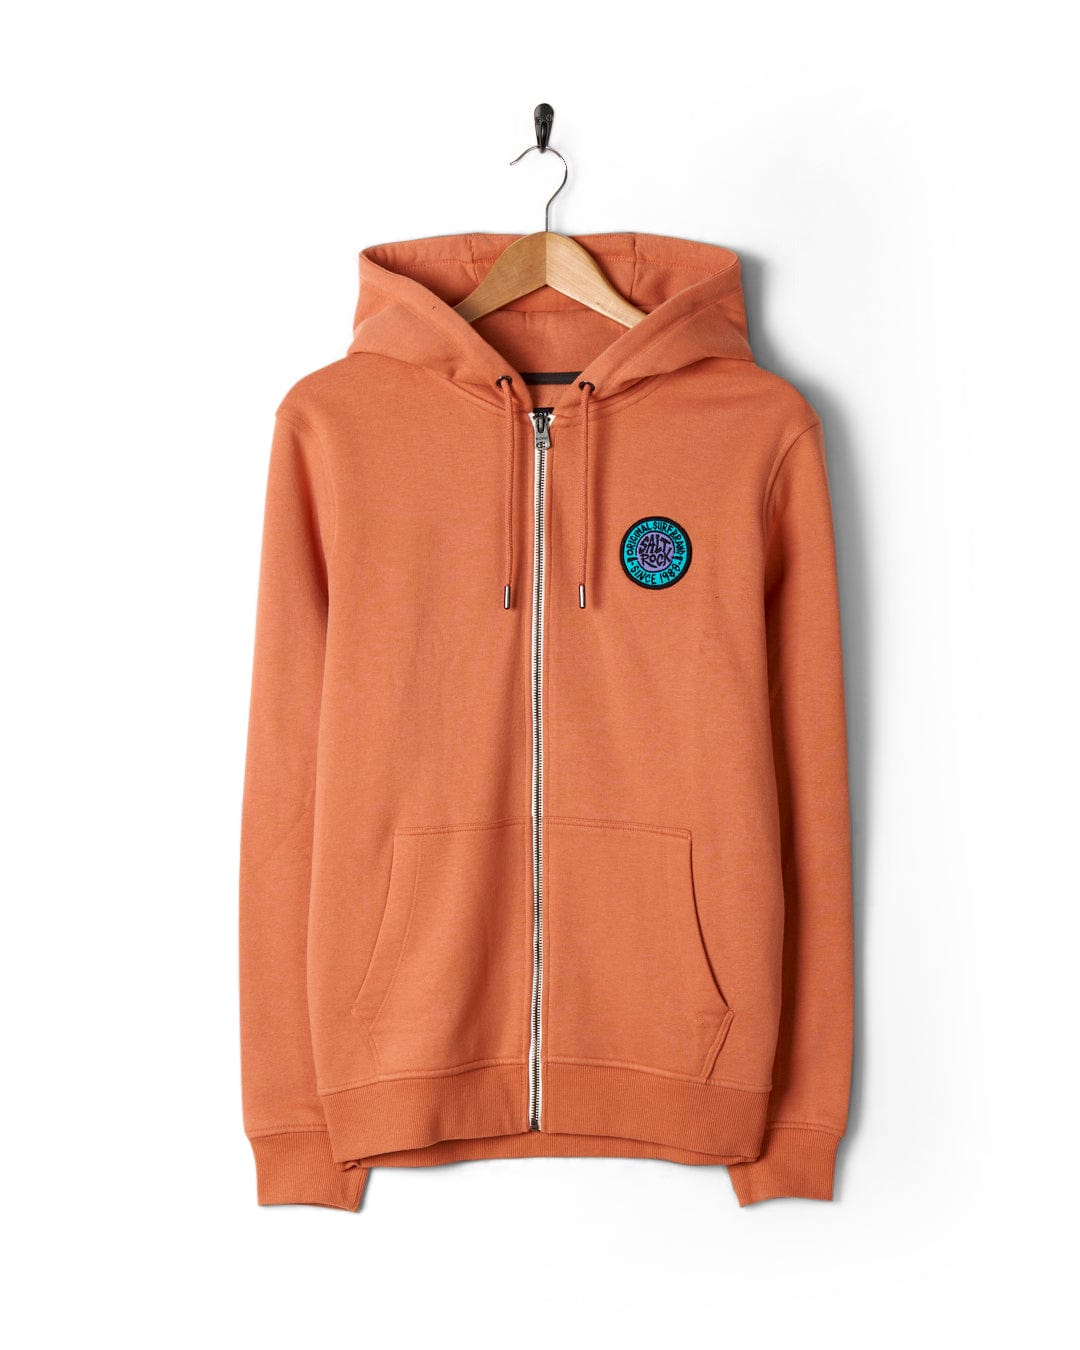 An SR Original - Recycled Mens Zip hoodie - Orange with a zipper and a small Saltrock retro surf logo on the chest, hanging on a wooden hanger against a white background.